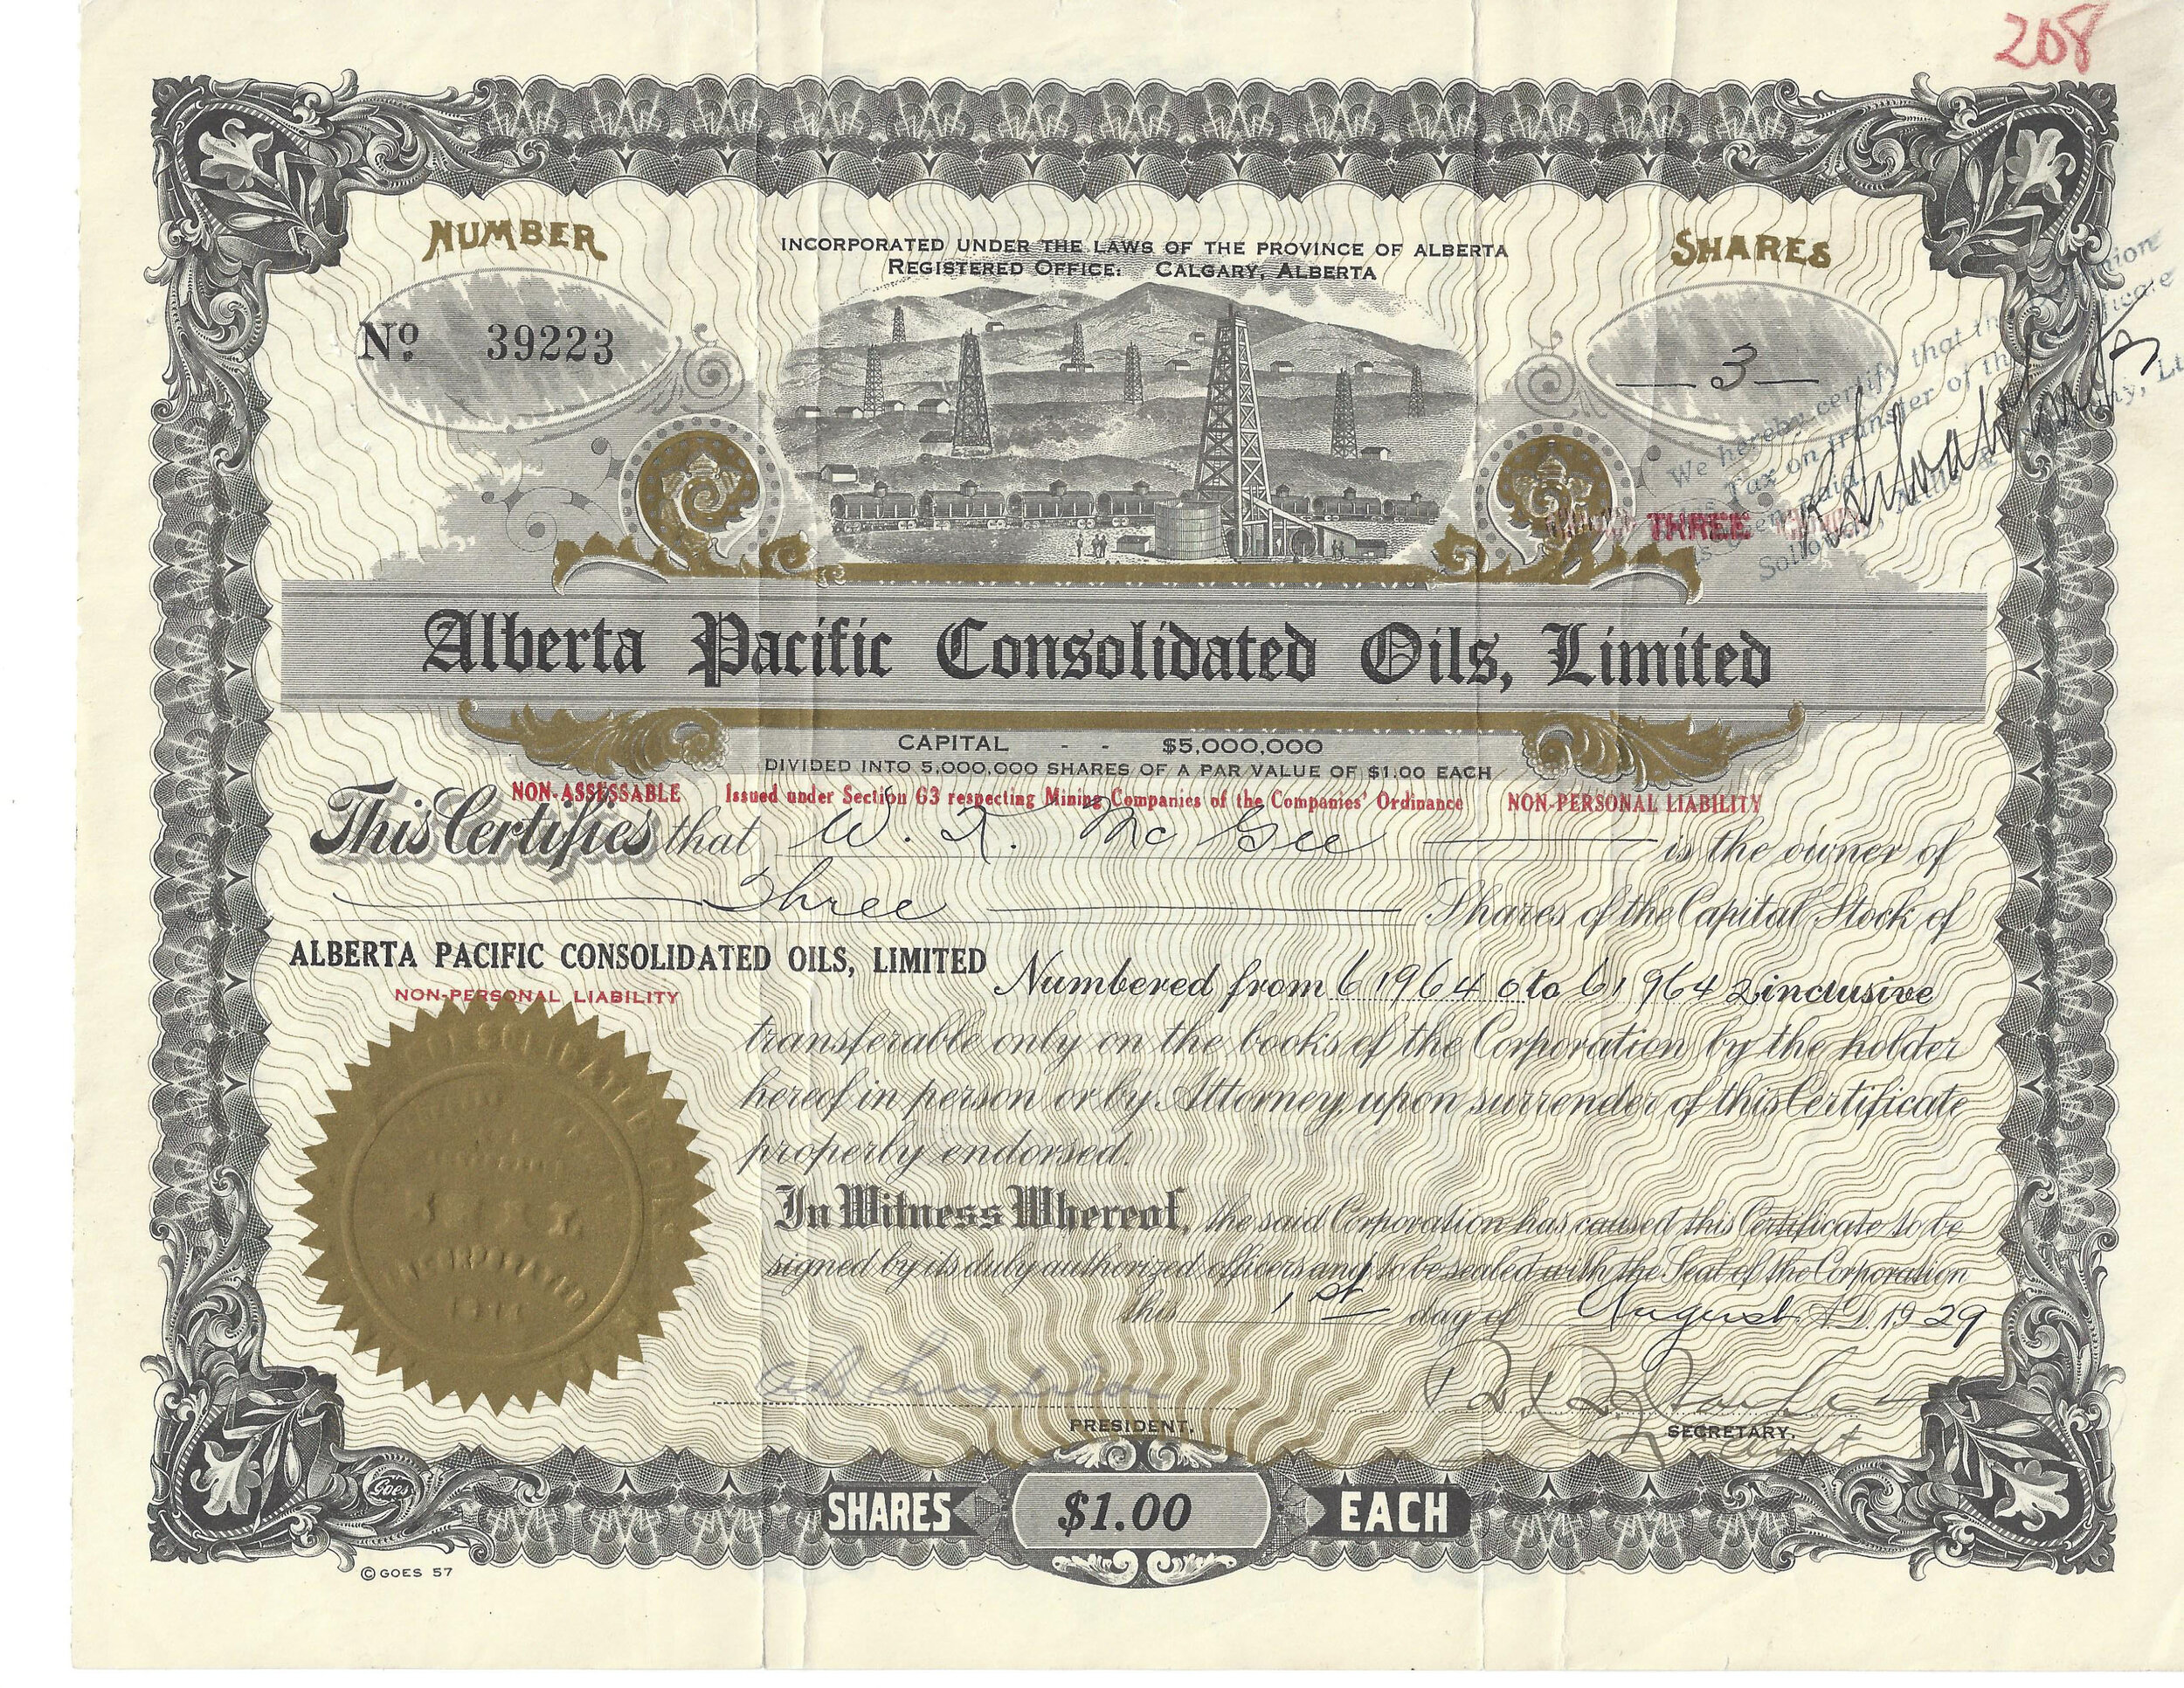 Alberta Pacific Consolidated Oils, Limited 1929 